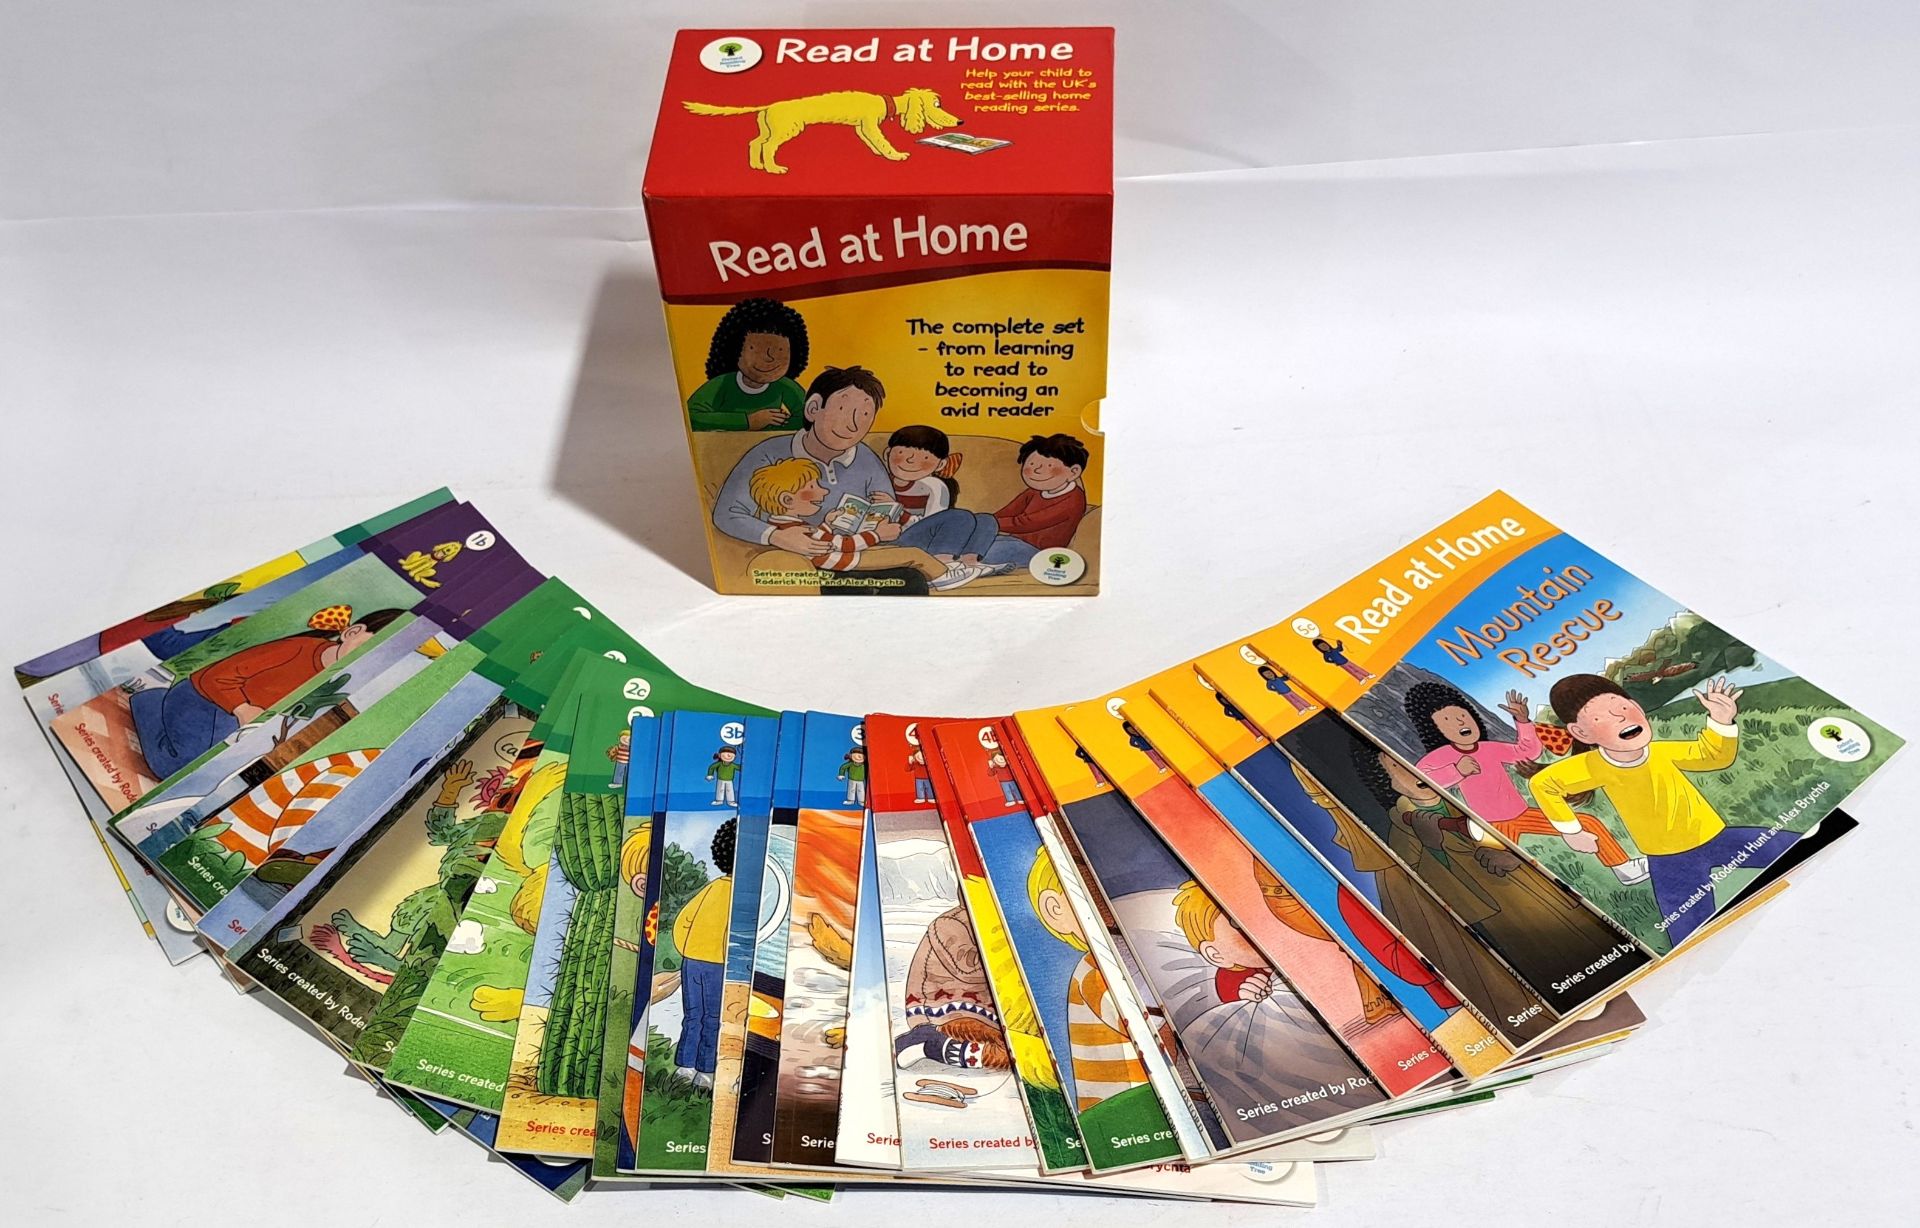 Oxford Reading Tree Read at Home Books - Image 2 of 2